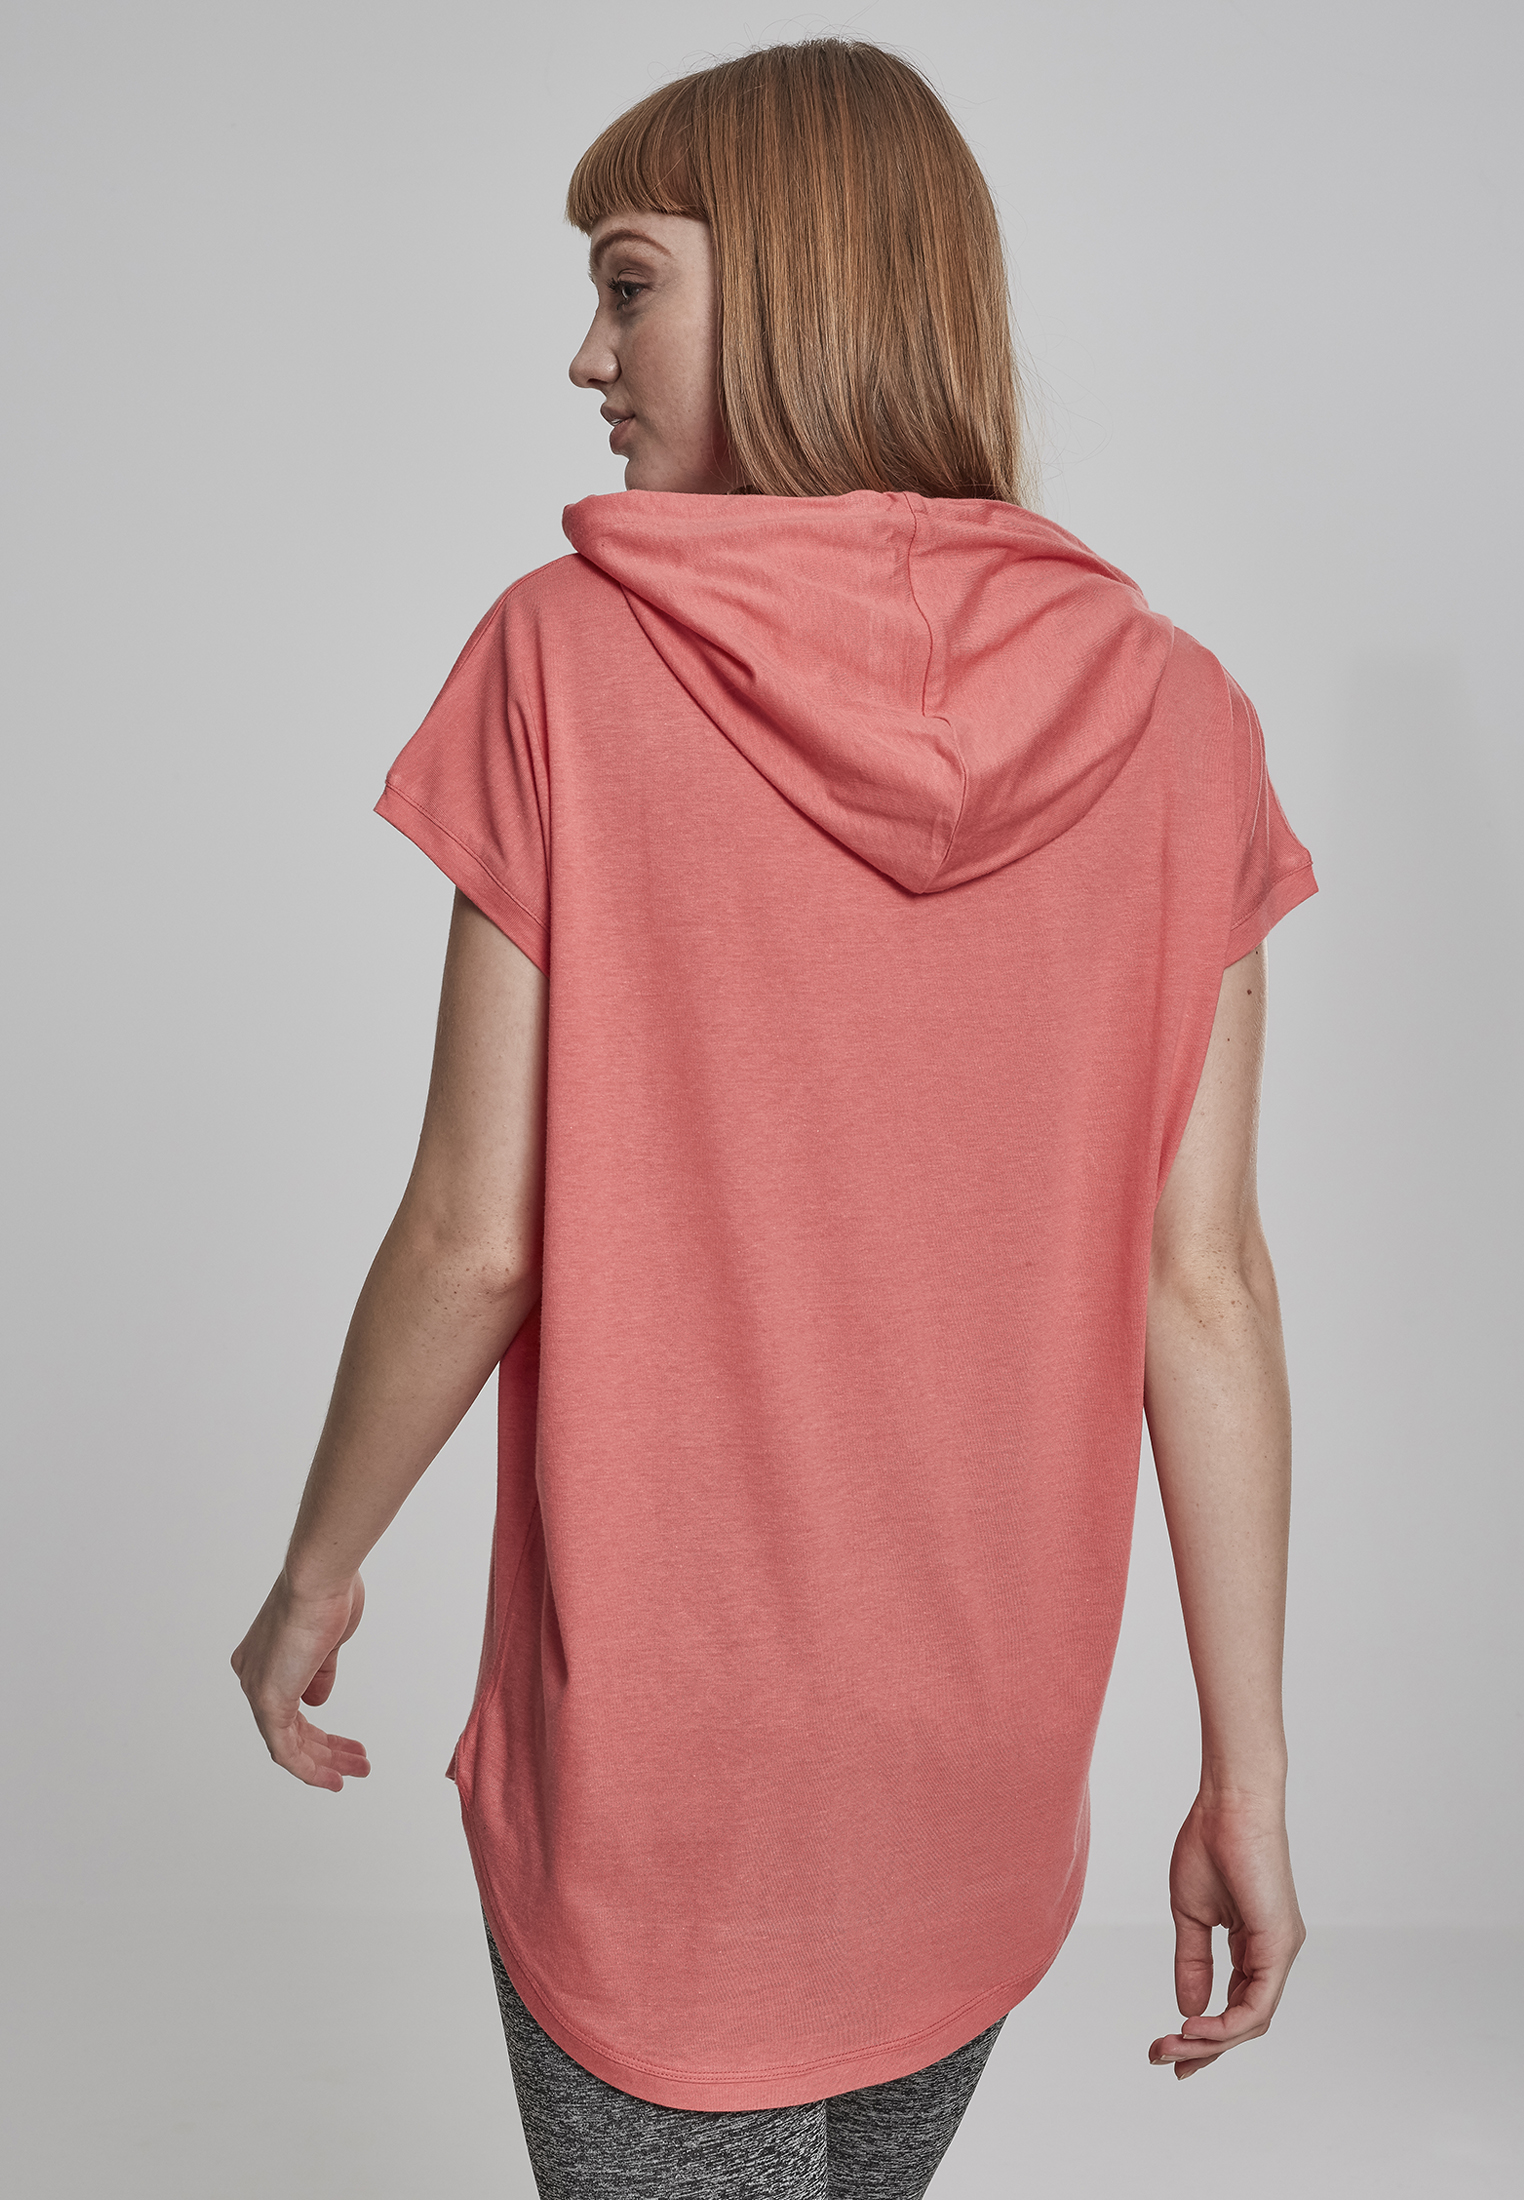 Curvy Ladies Sleeveless Jersey Hoody in Farbe coral